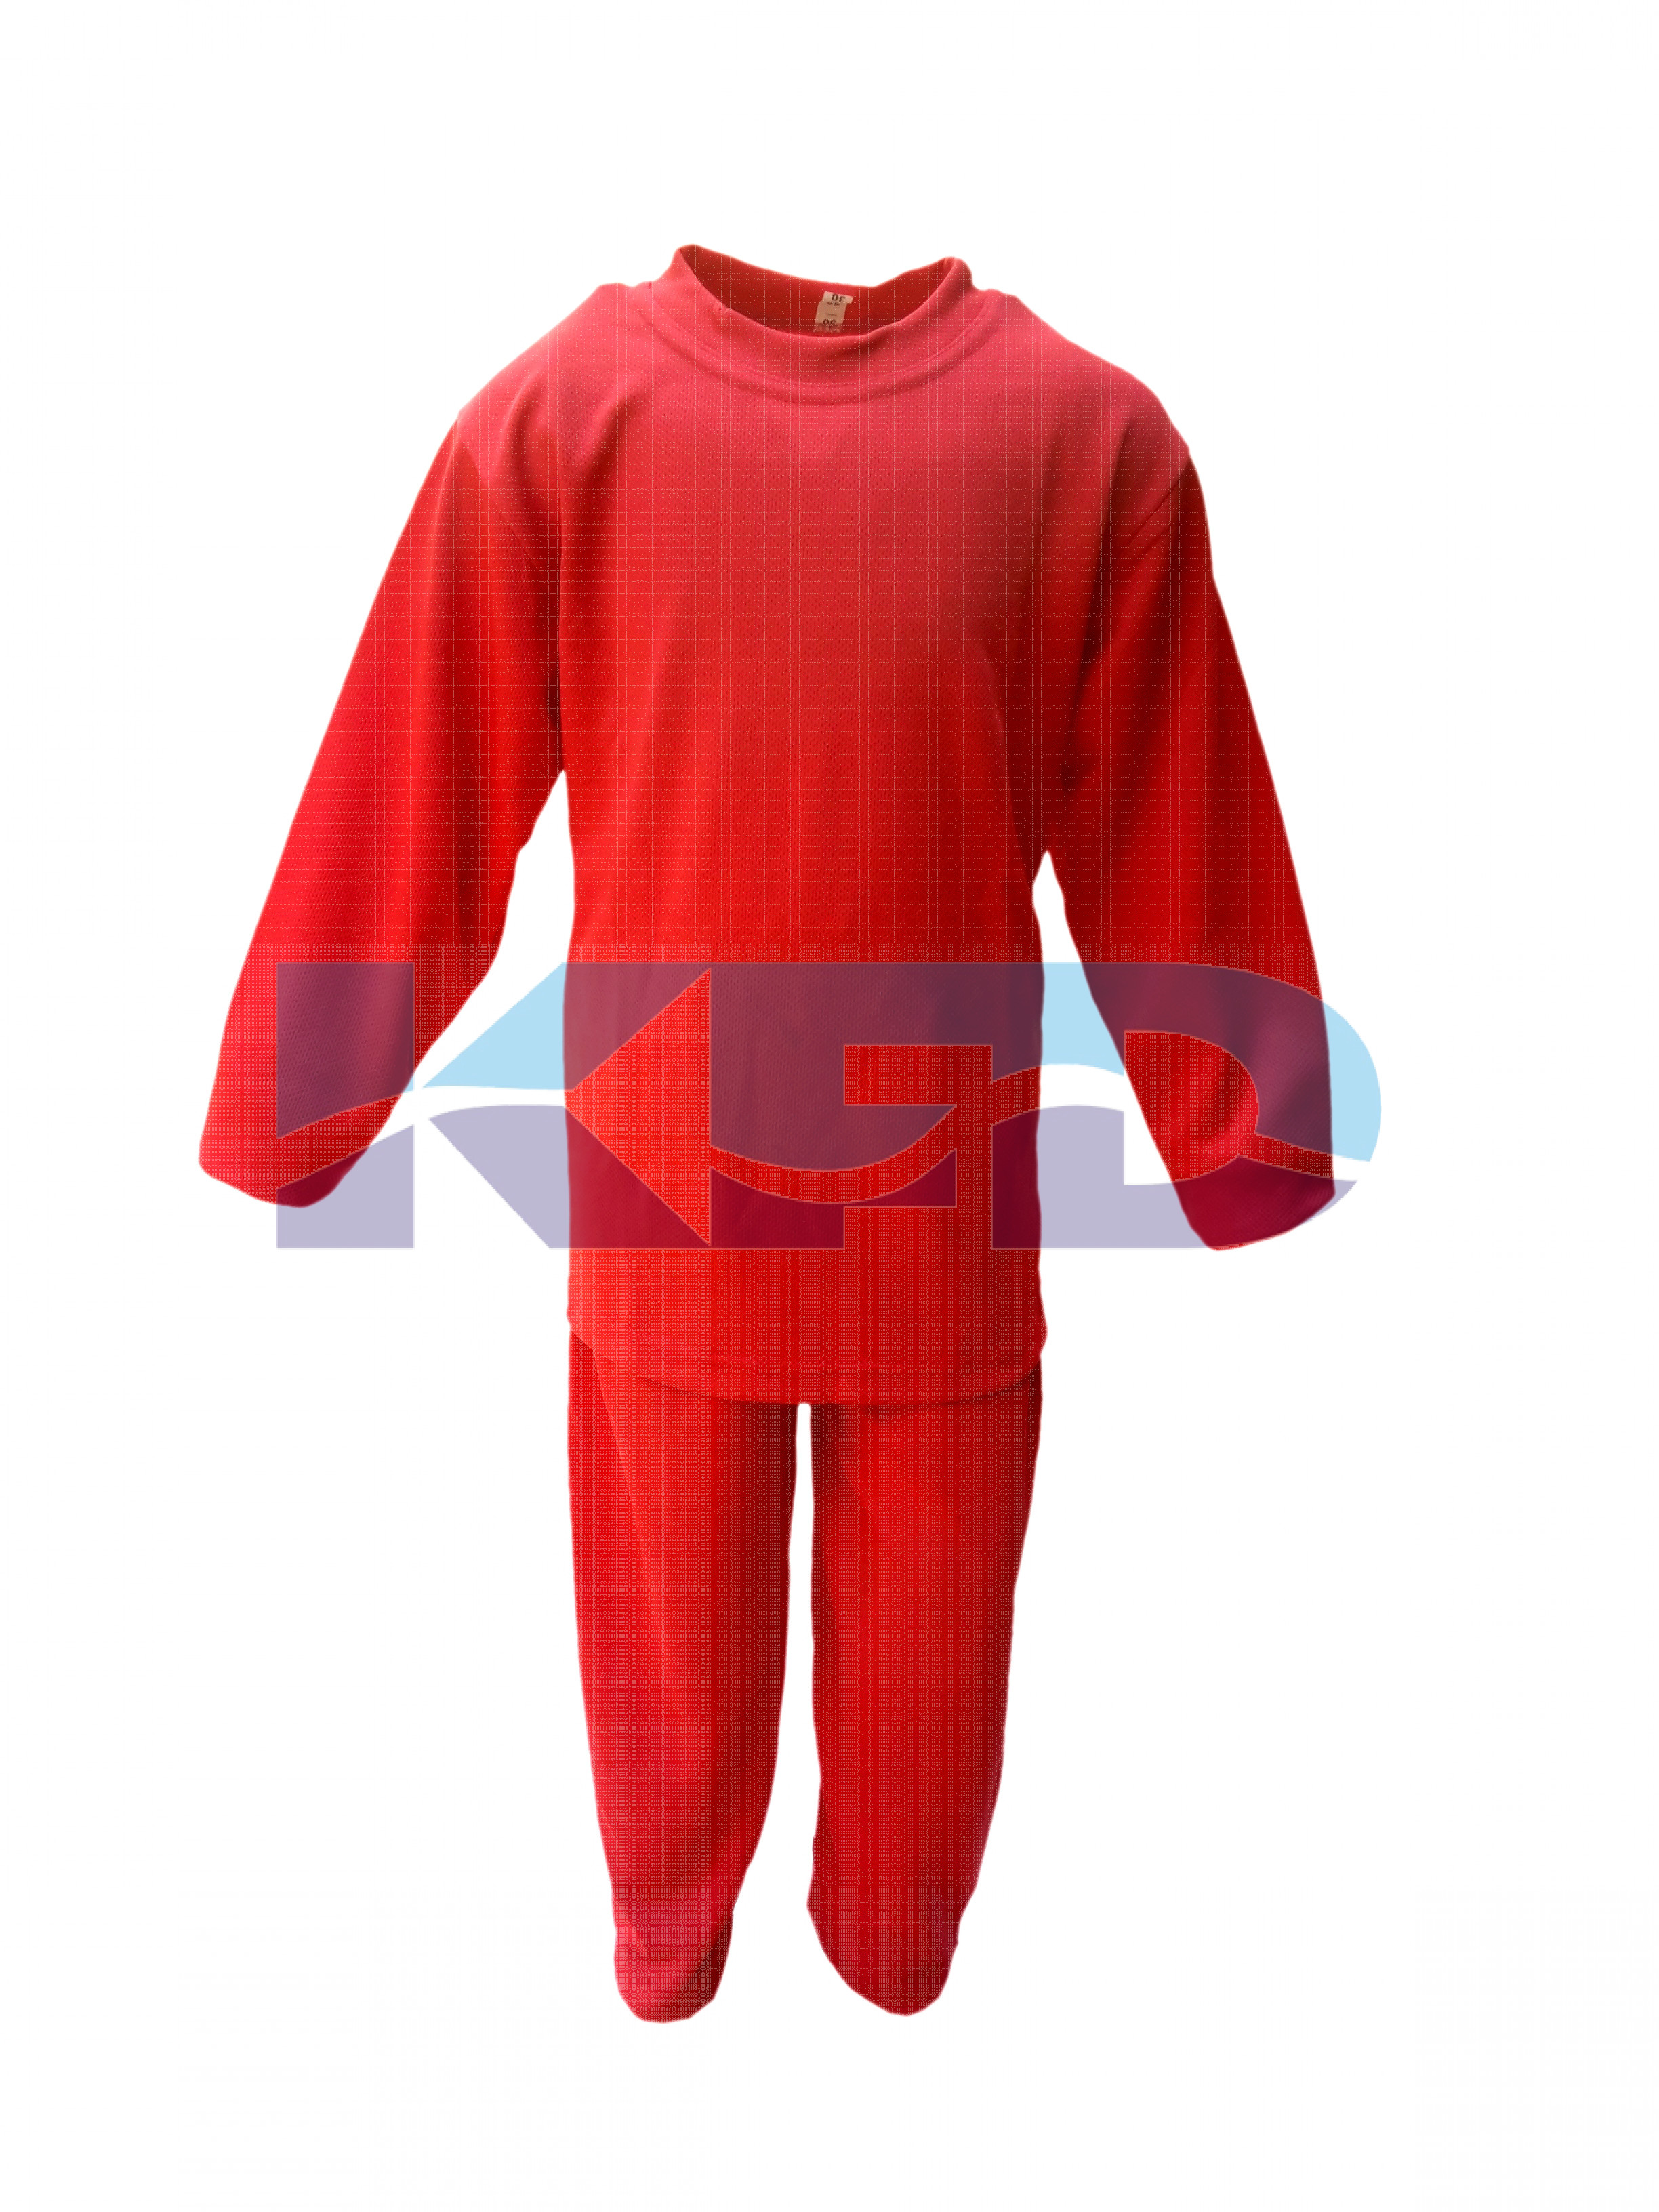 Track Suite RedColor fancy dress for kids,Costume for School Annual function/Theme Party/Competition/Stage Shows/Birthday Party Dress